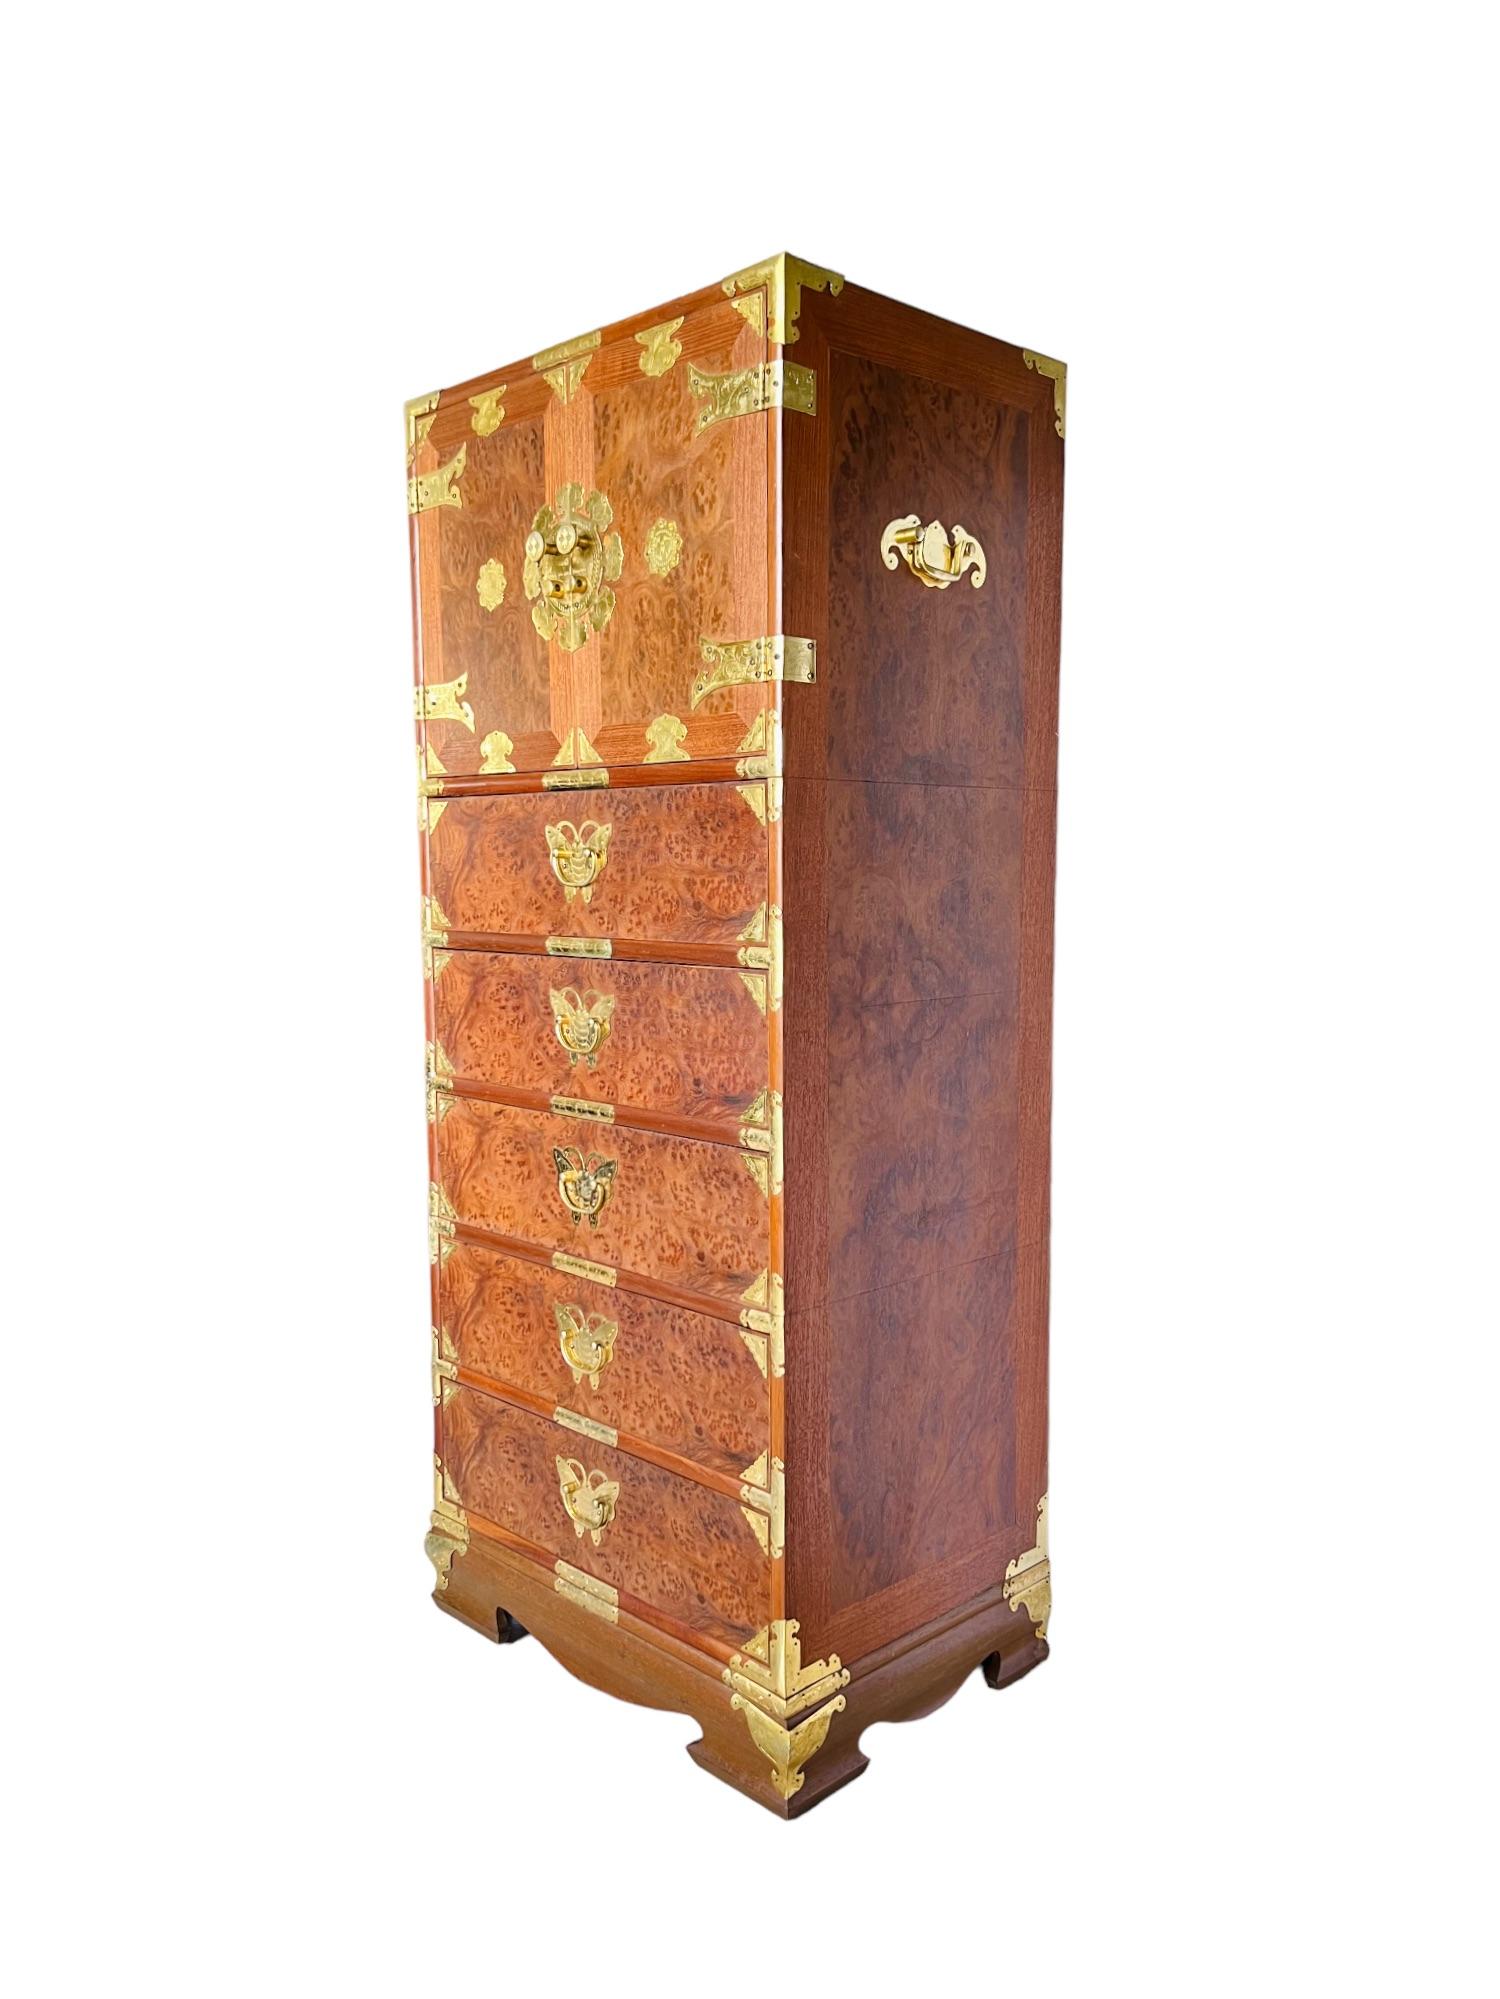 A vintage 1960s Chinese Campaign style lingerie chest finely crafted of teak and burl elm wood and embellished with etched brass mounts. This stunning chiffonier features a medallion adorned upper cabinet and boasts a total of eleven drawers - six